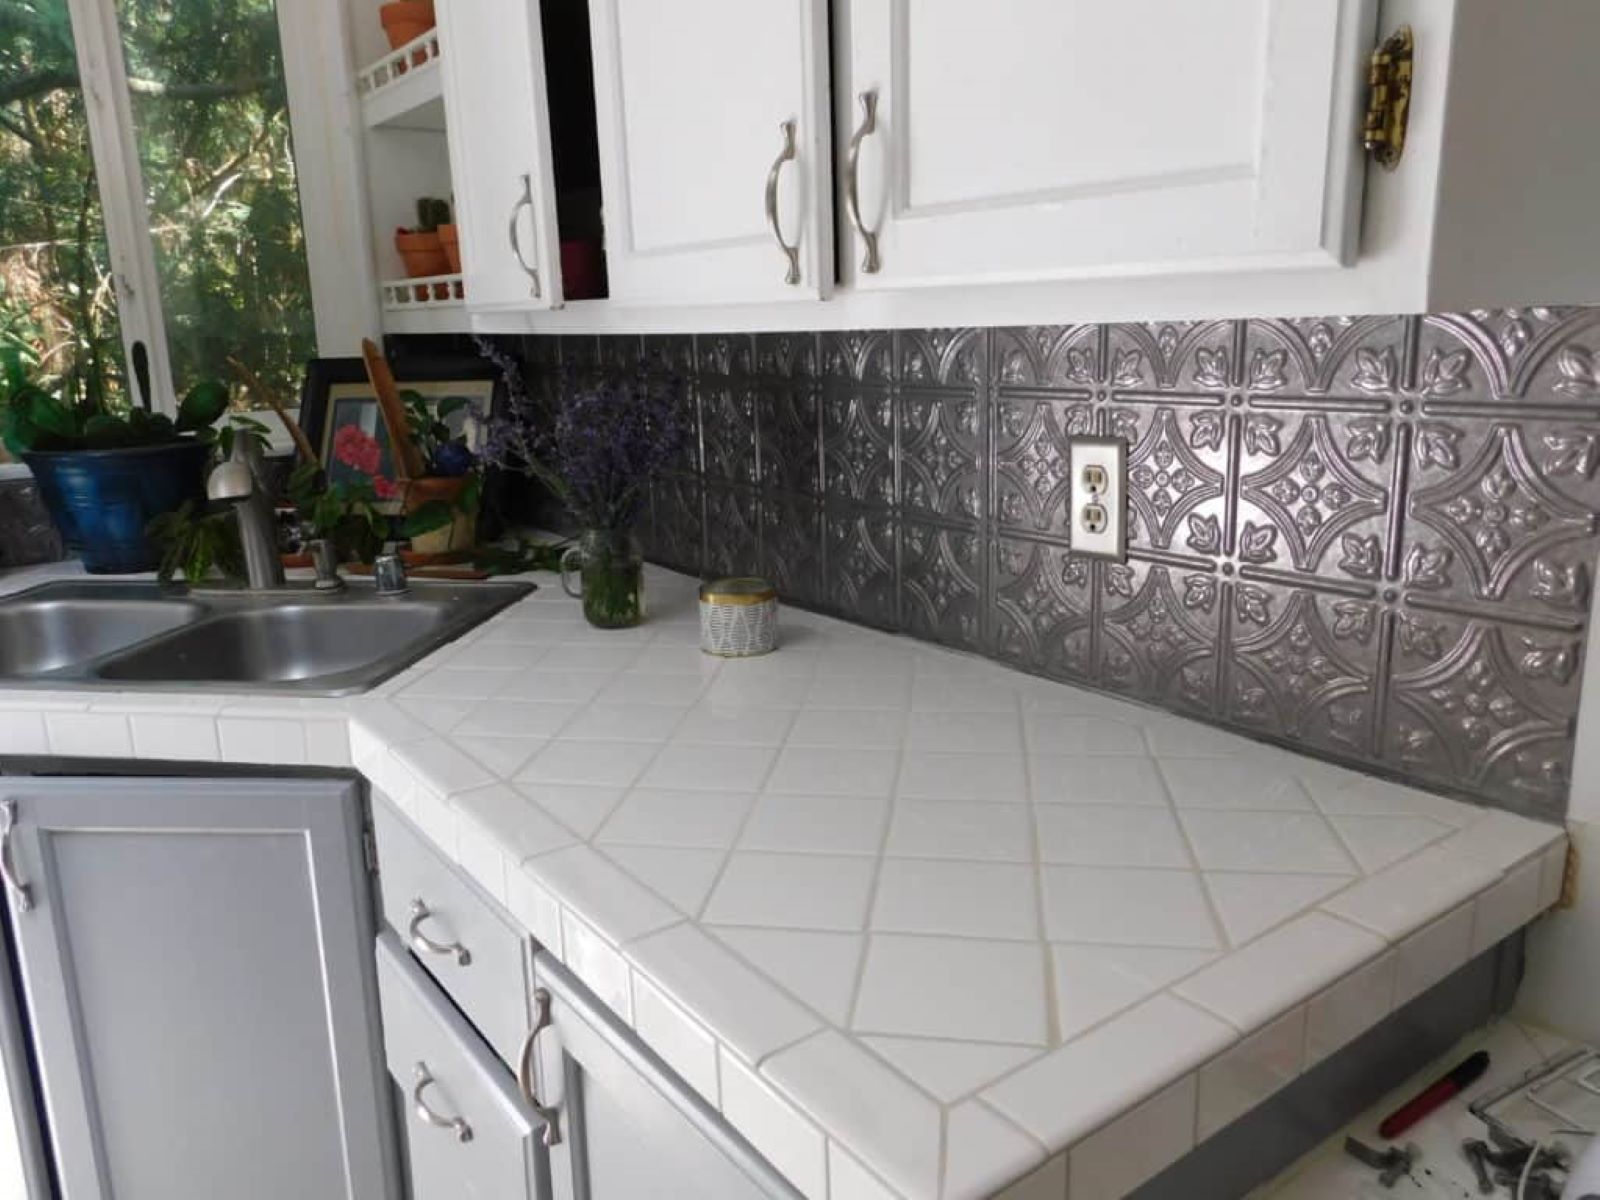 How To Cover Kitchen Tile Countertops